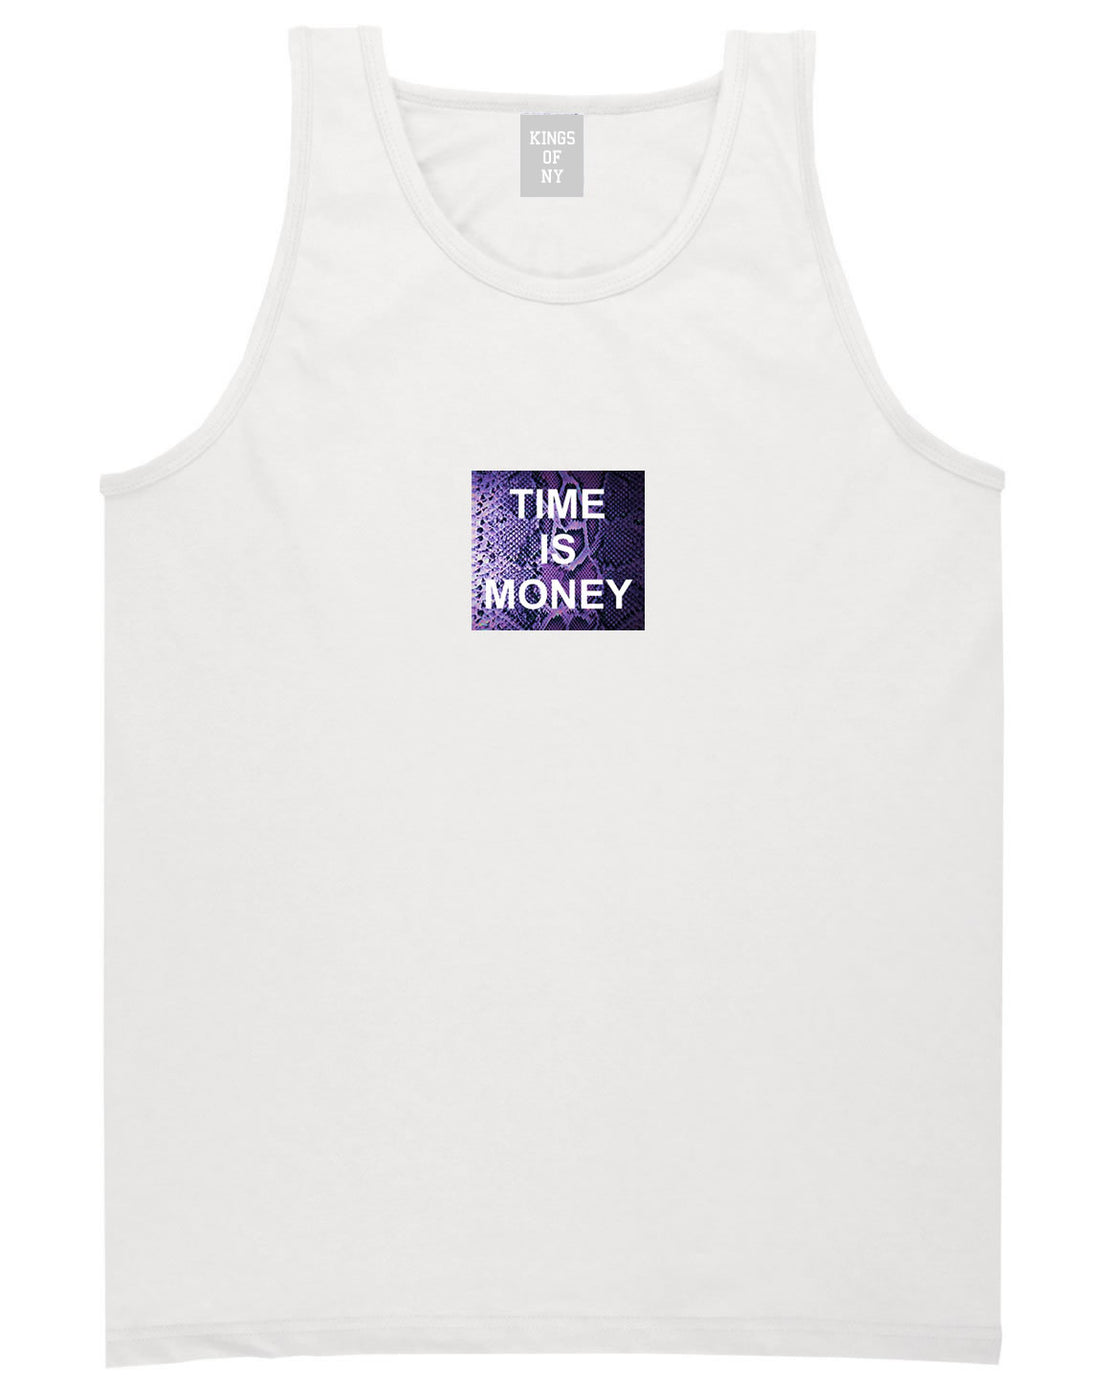 Time Is Money Snakesin Print Tank Top in White By Kings Of NY